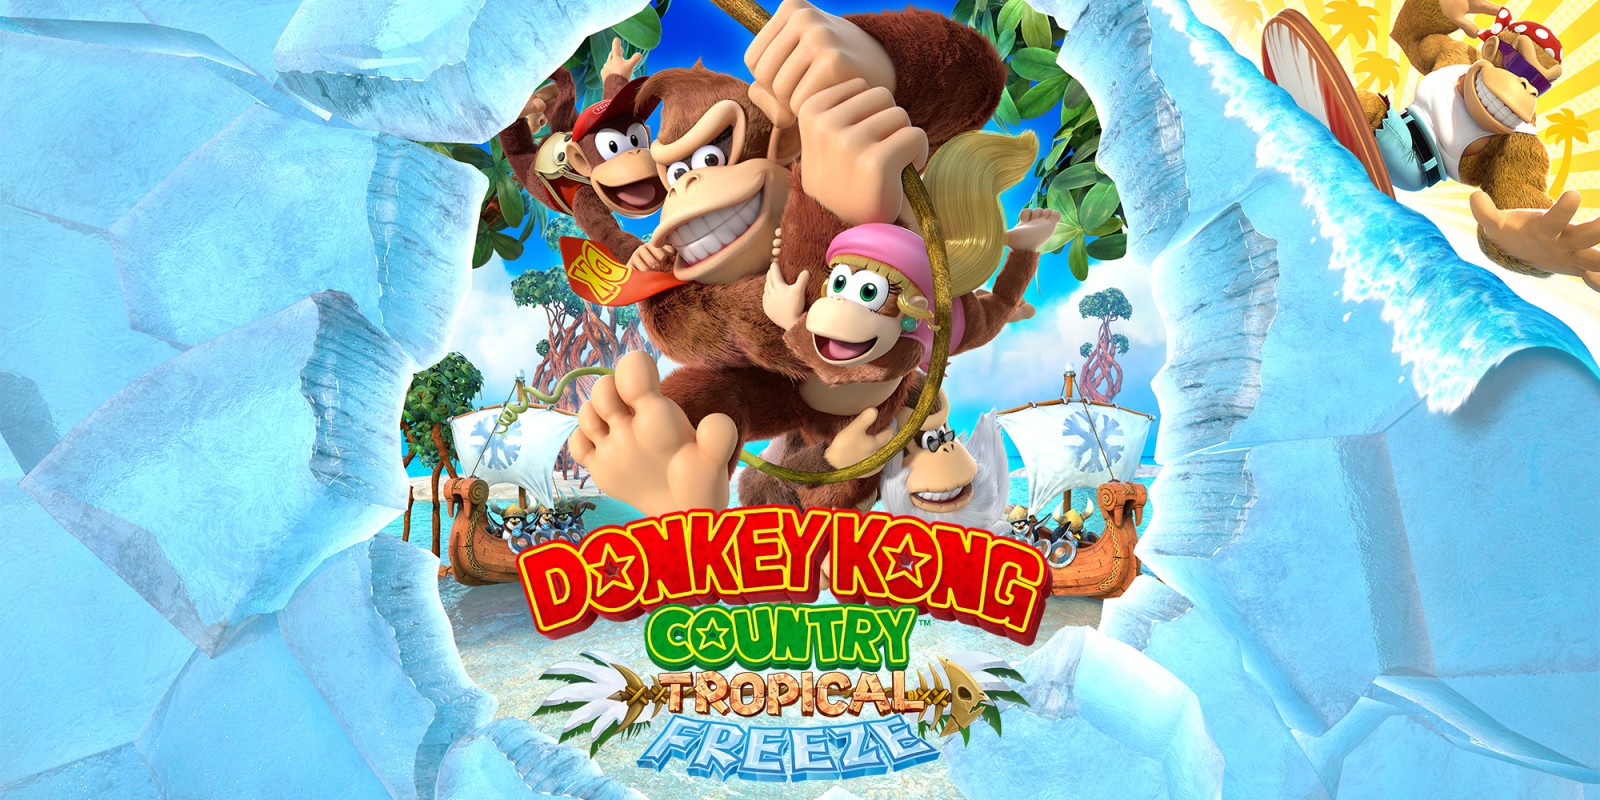 Donkey Kong Country: Tropical Freeze si mostra nel gameplay trailer ufficiale